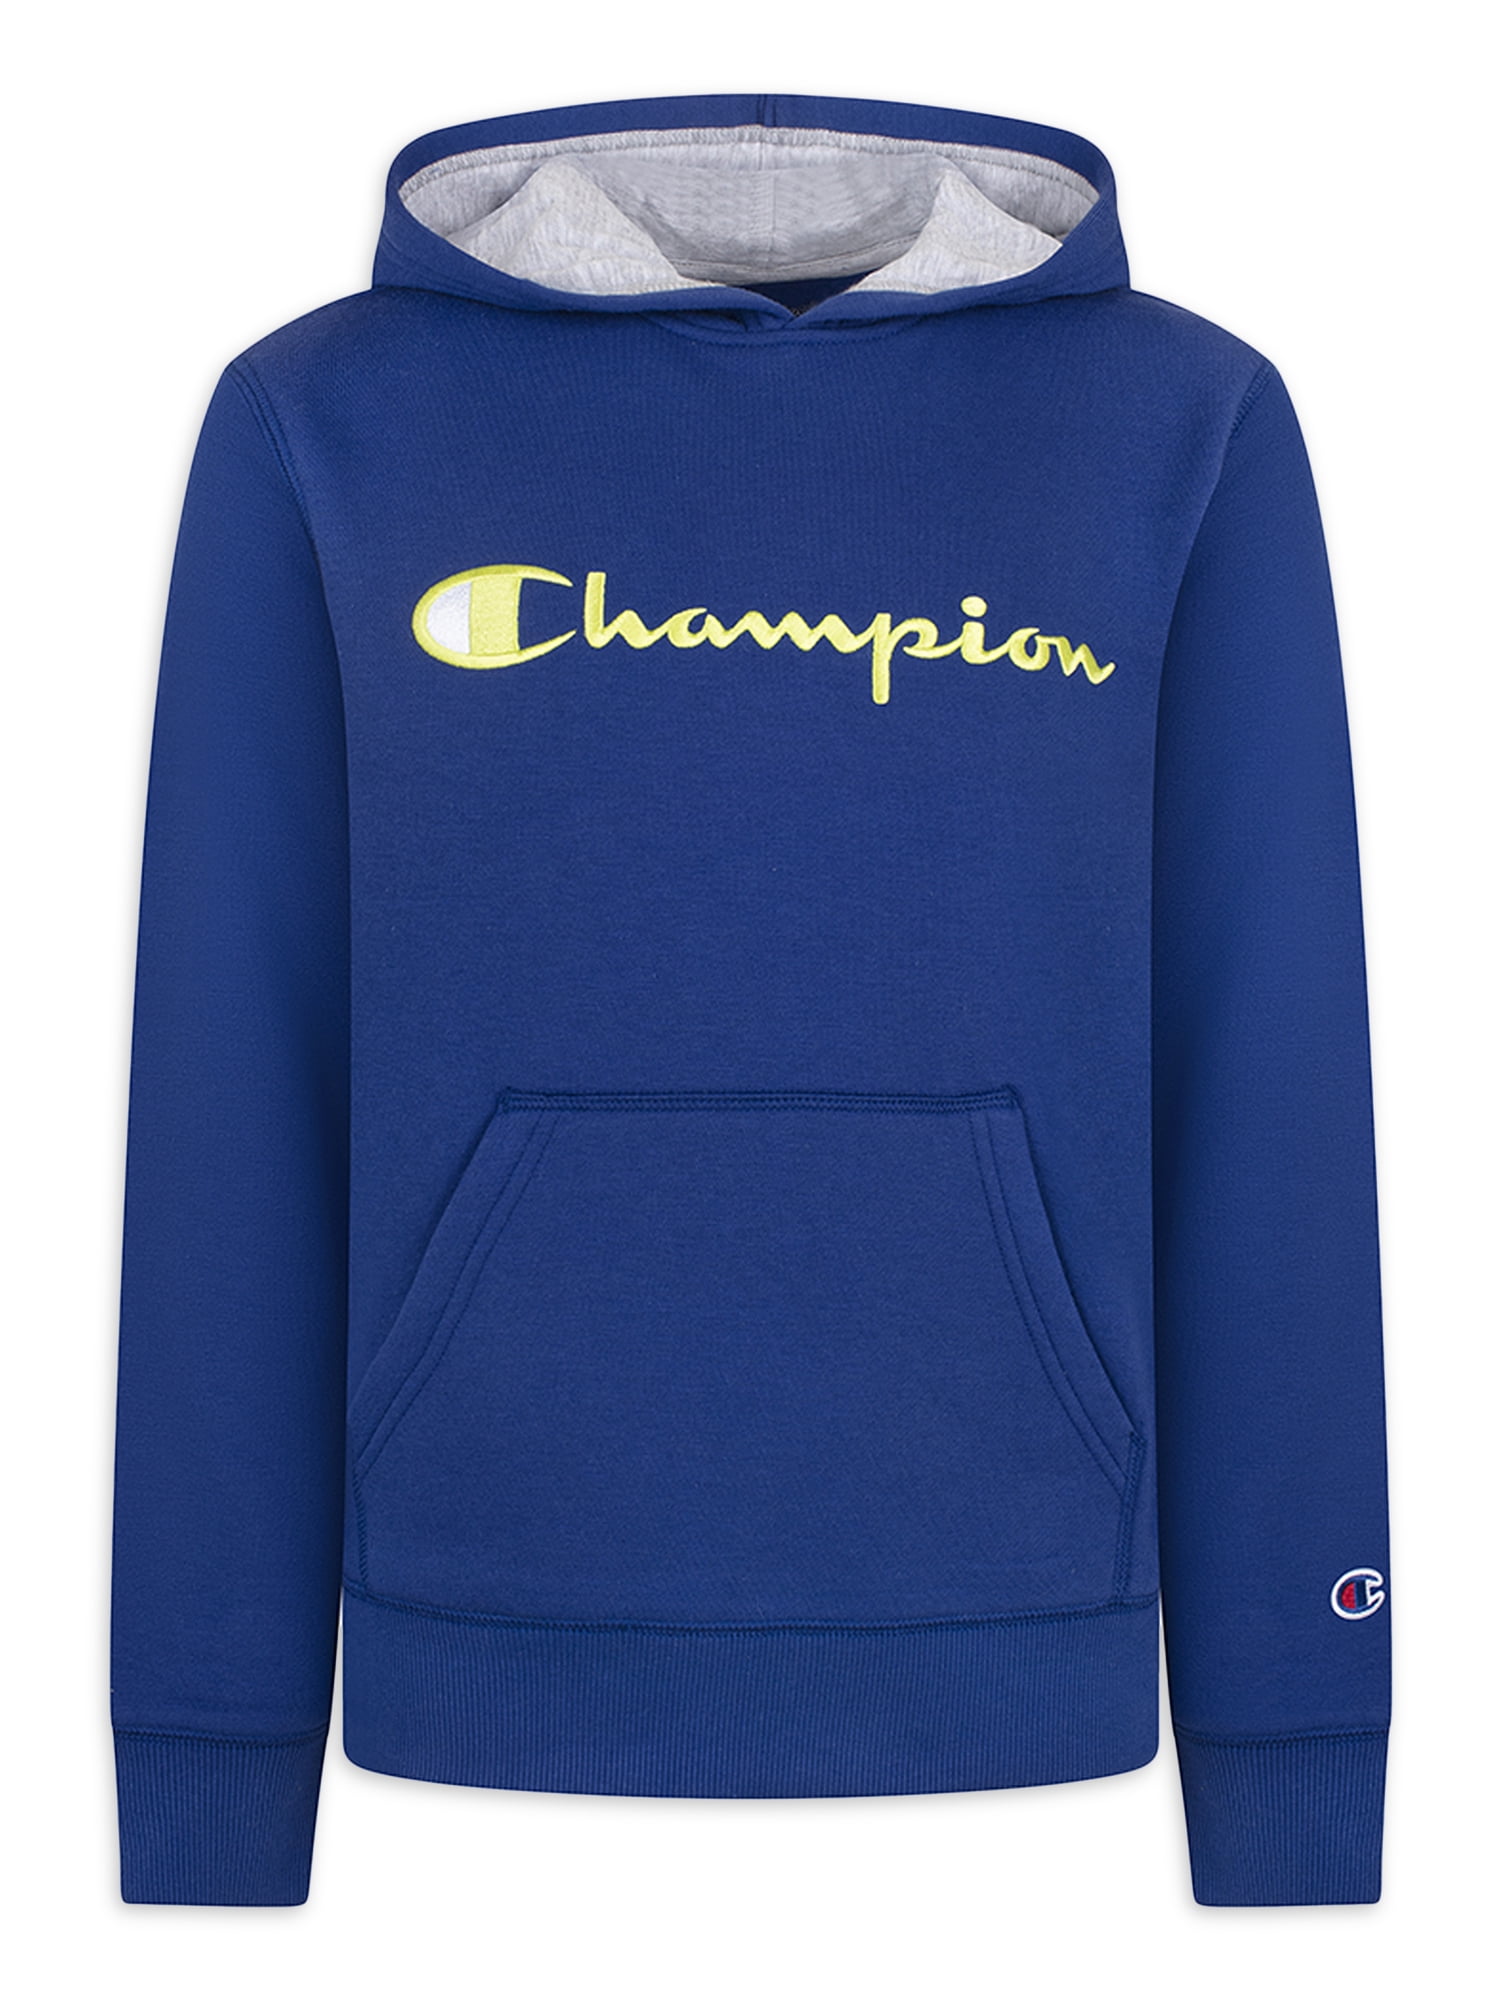 Champion Hoodie Jumper Navy Blue 5/6 Size Youth Large